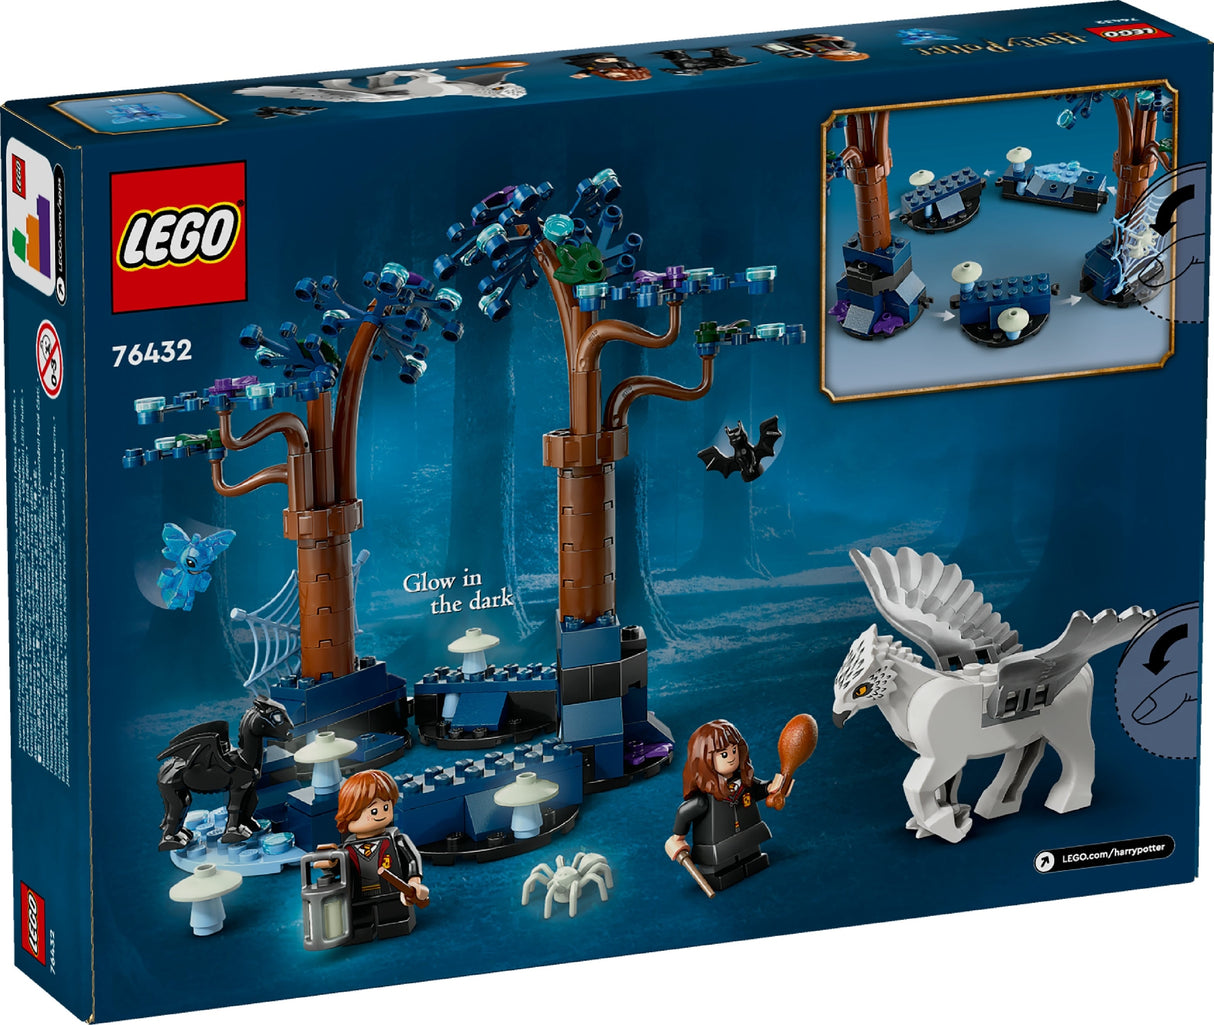 LEGO HARRY POTTER FORBIDDEN FOREST: MAGICAL CREATURES 76432 AGE: 8+